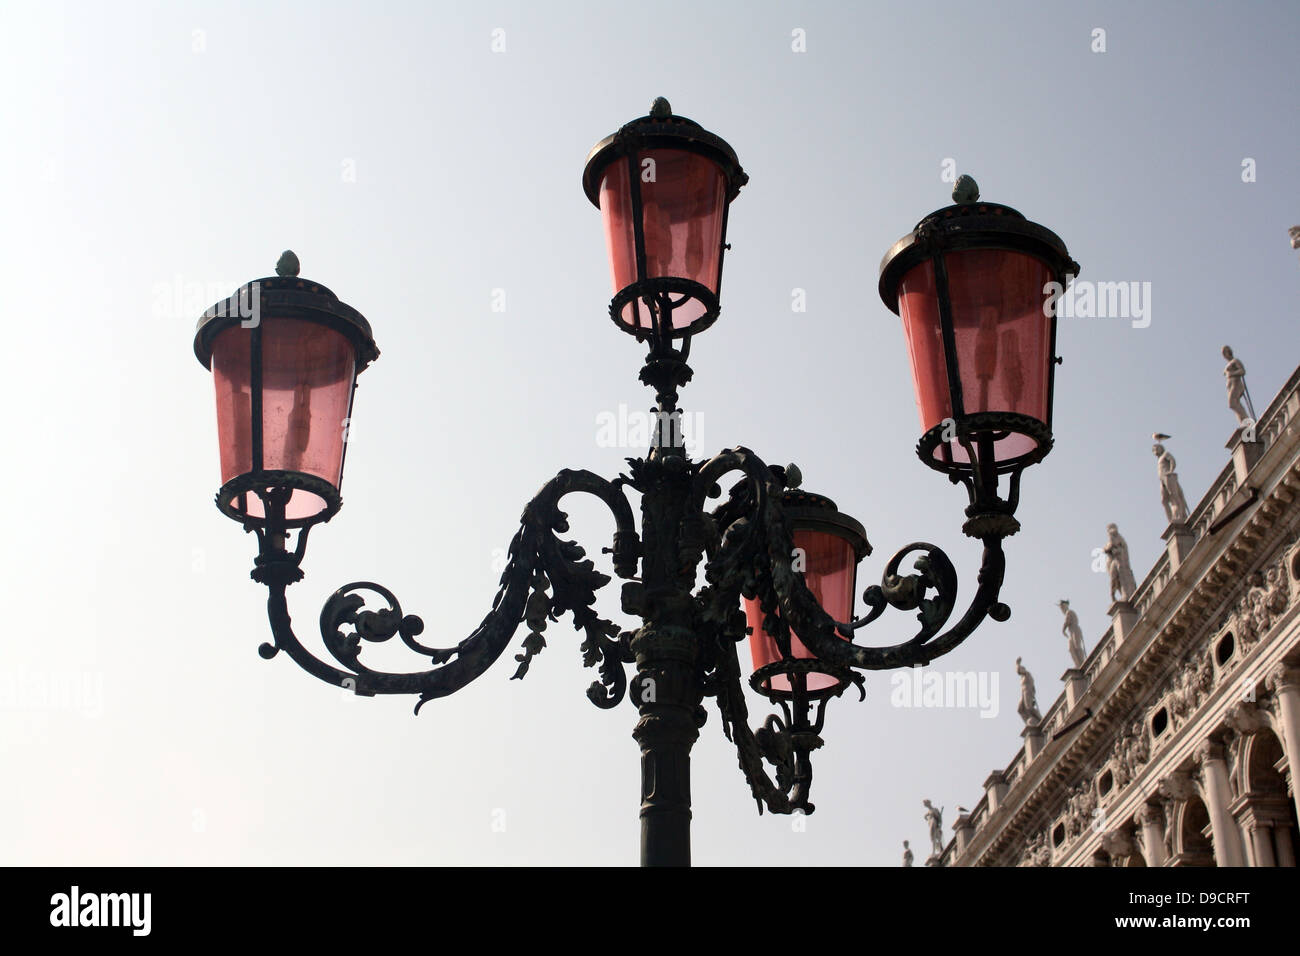 Energy saving eco-friendly lighting on a lamppost in the Piazzetta di San Marco, Venice. Stock Photo